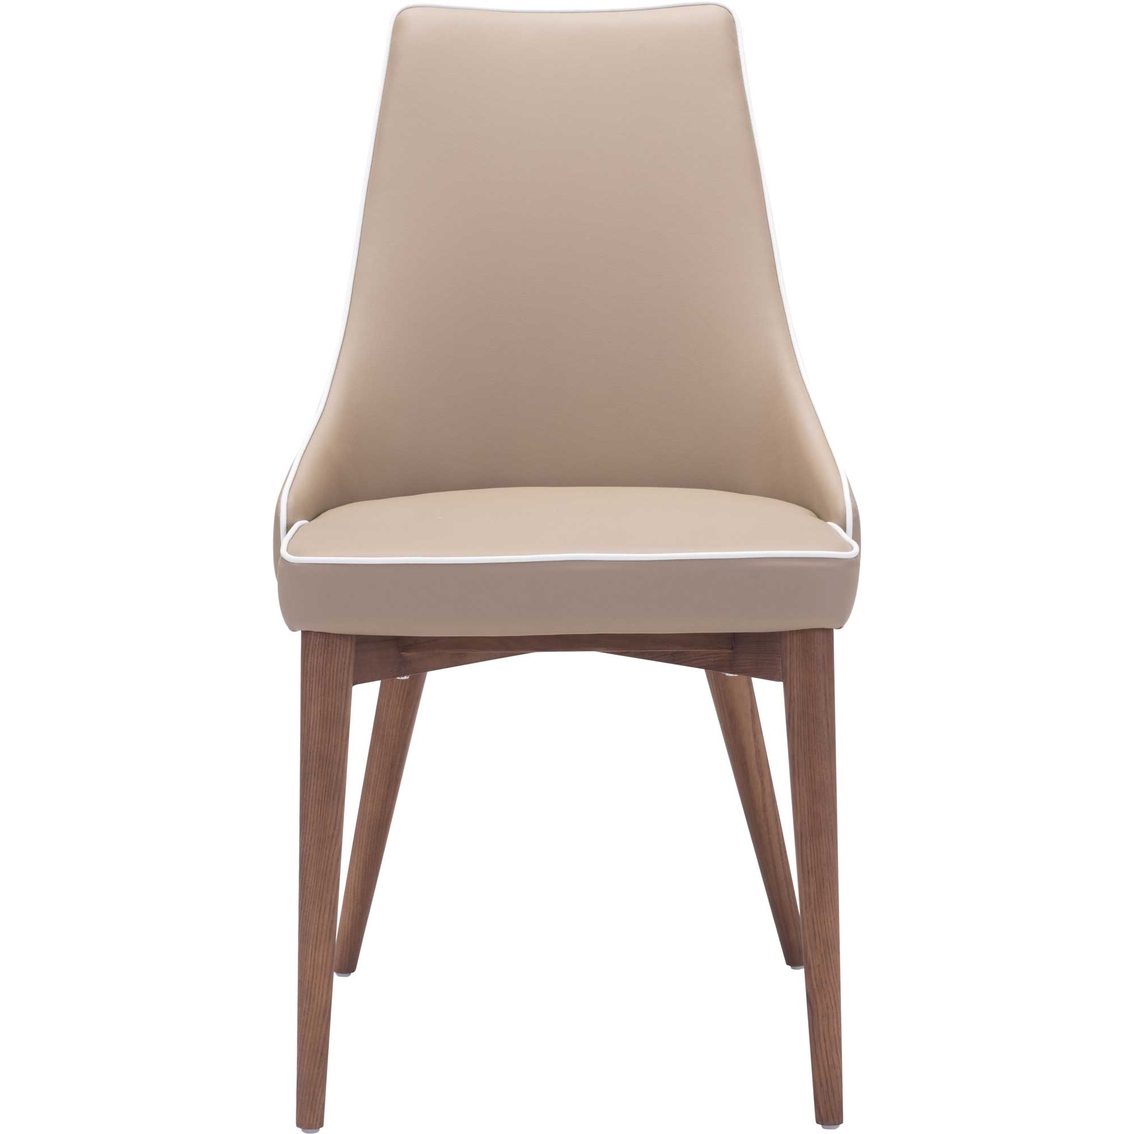 Zuo Modern Moor Dining Chair 2 Pk. - Image 3 of 8